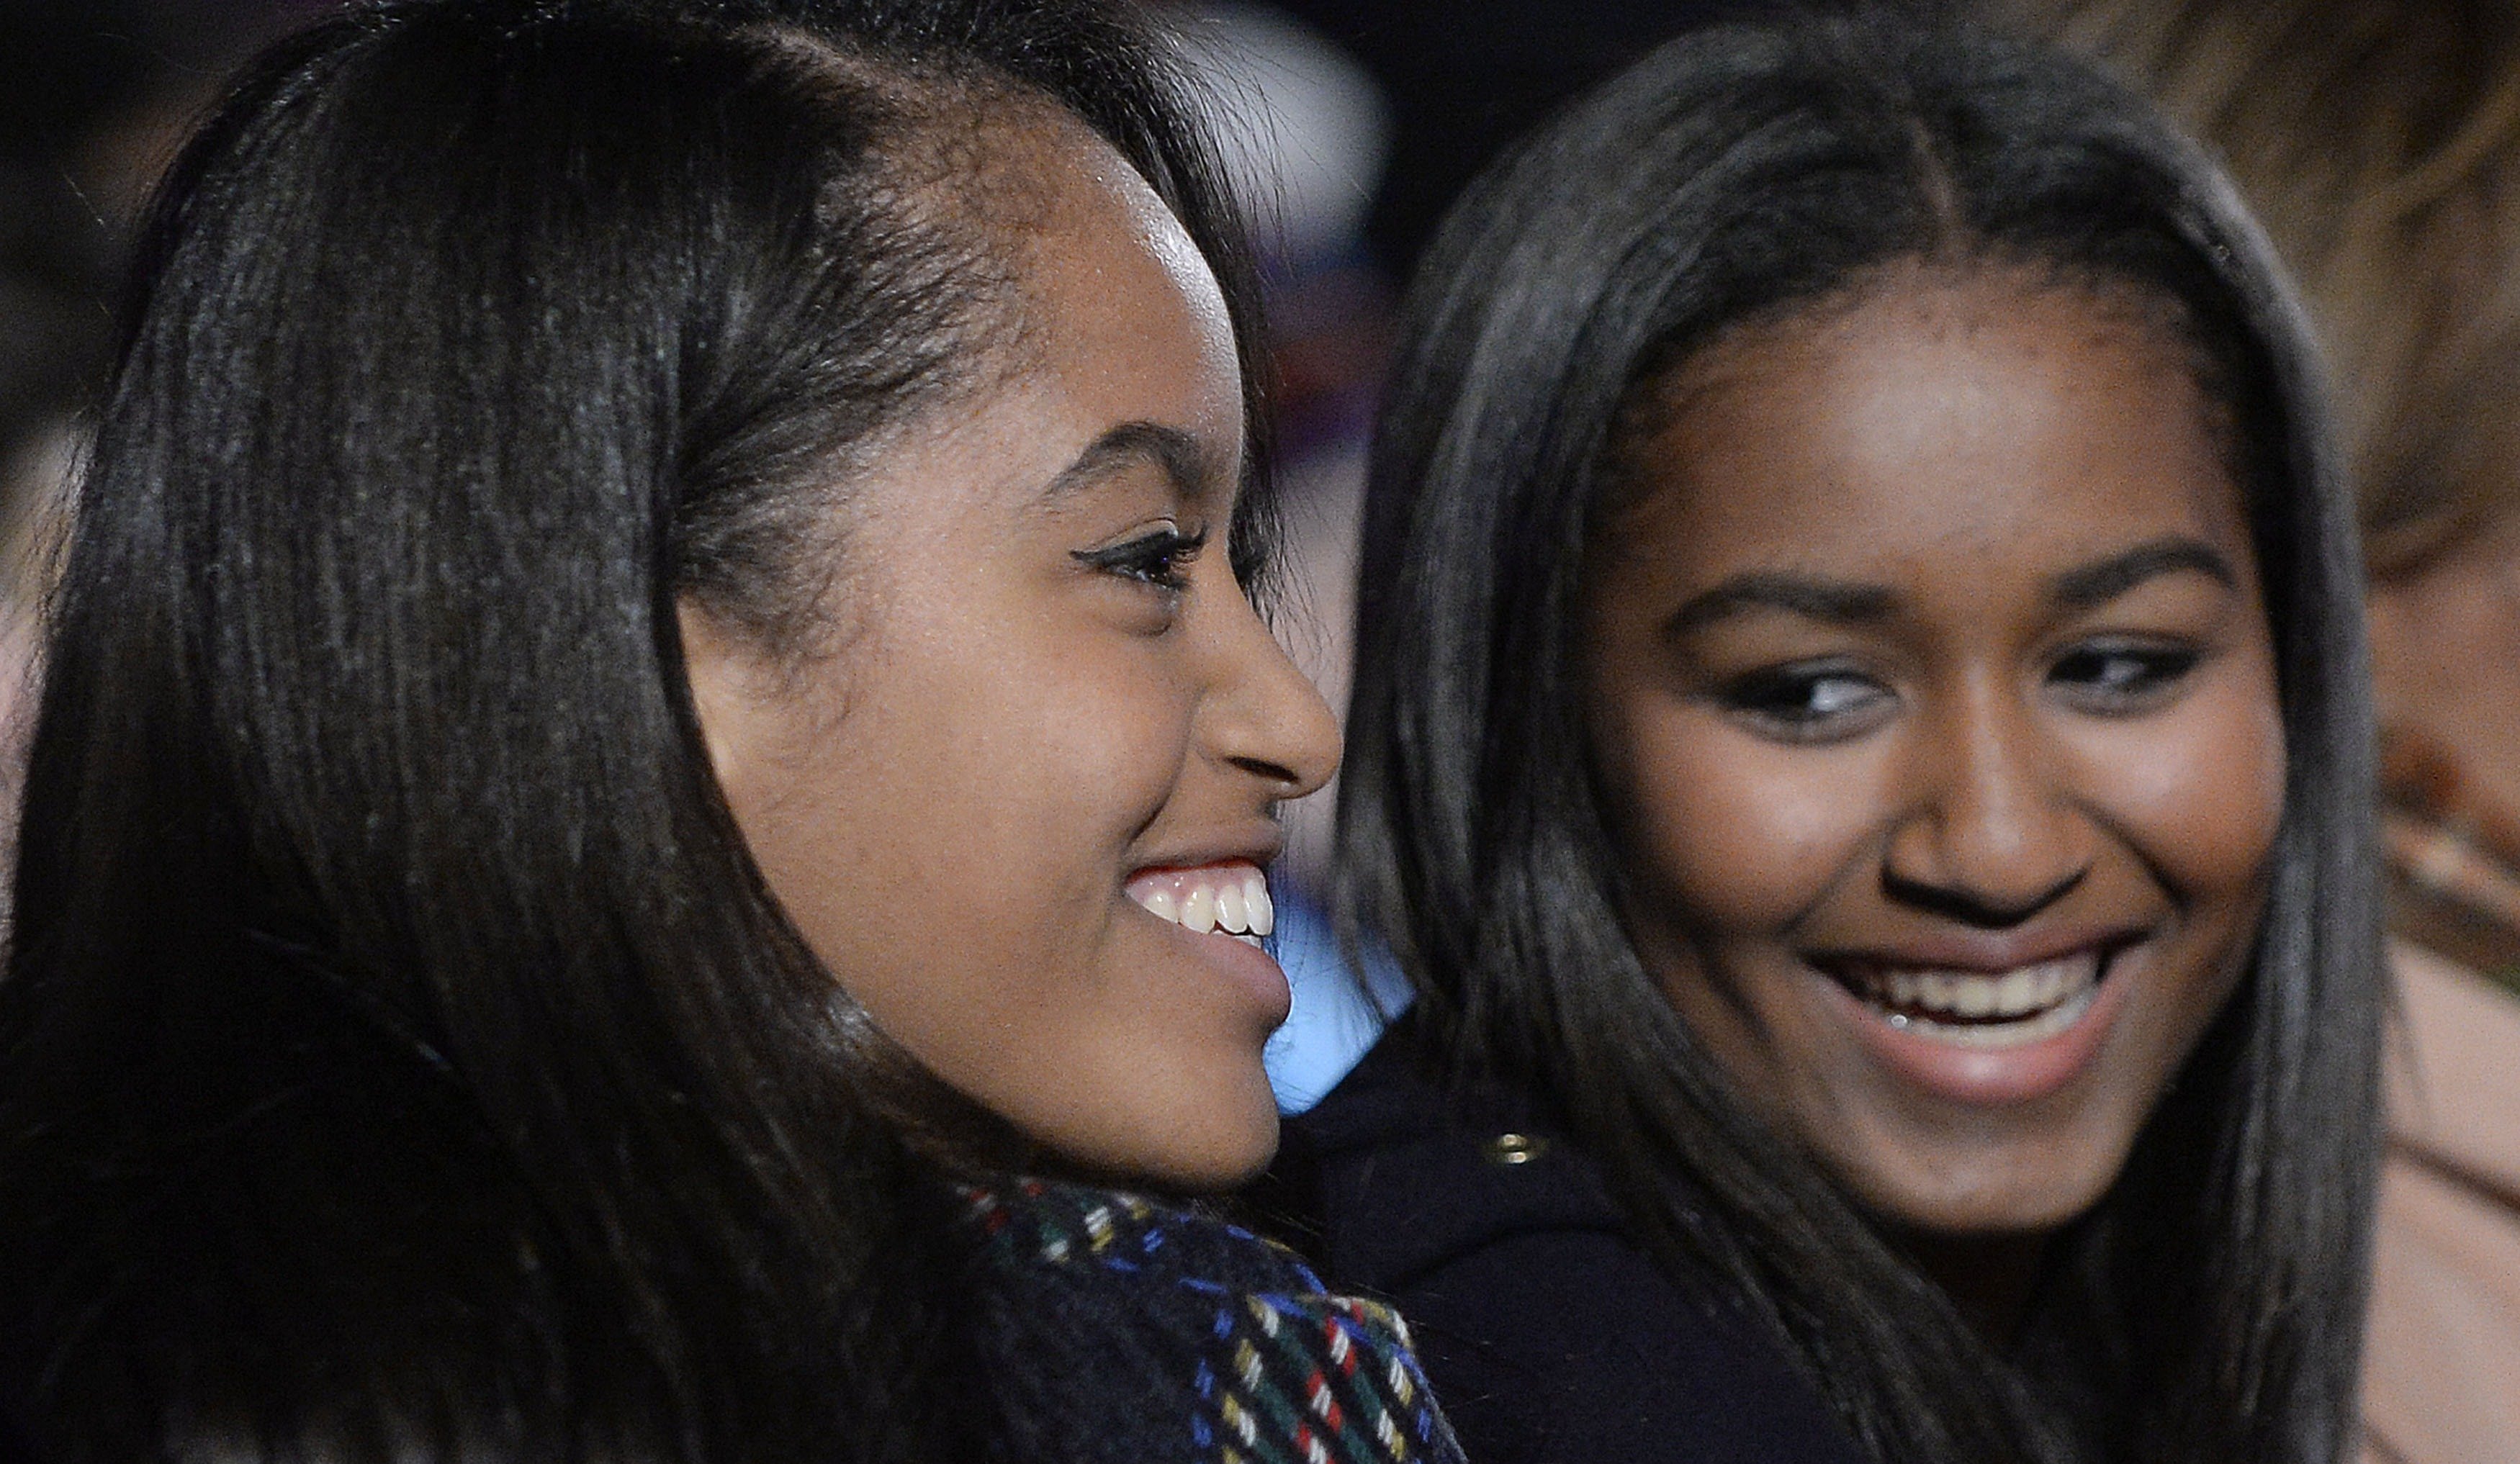 Malia and Sasha Obama attend the national Christmas tree lighting ceremony on the Ellipse south of the White House on December 3, 2015, in Washington, DC. | Source: Getty Images